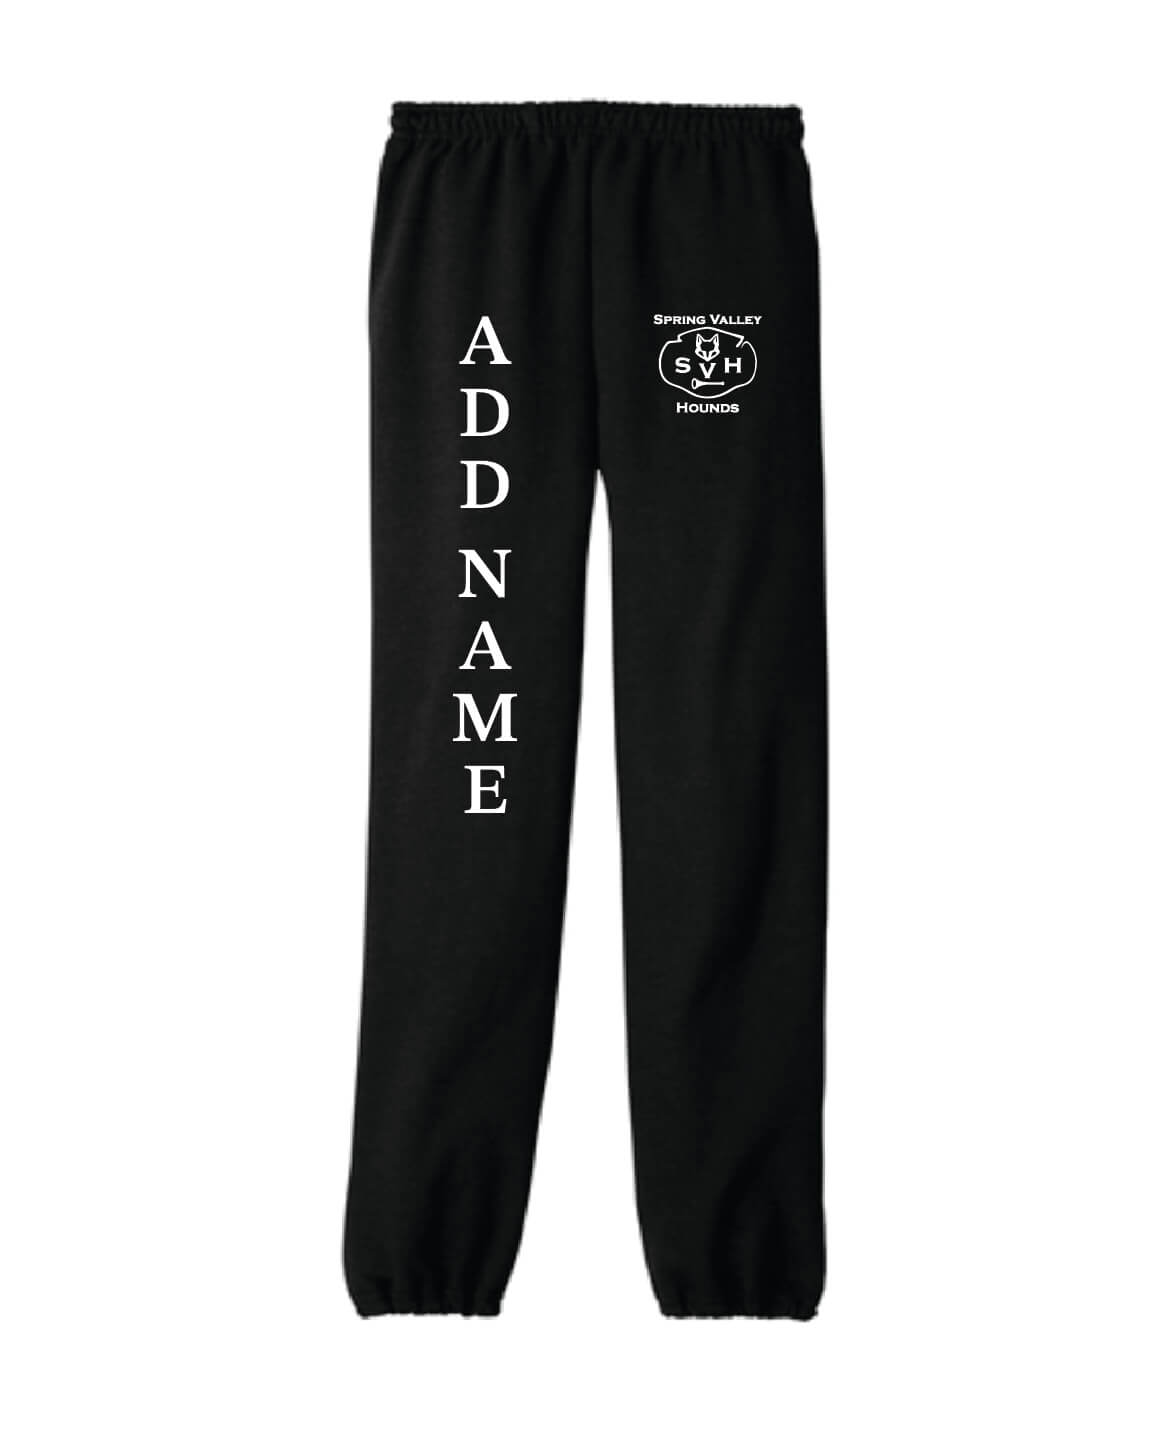 Sweatpants (Youth) Hounds black